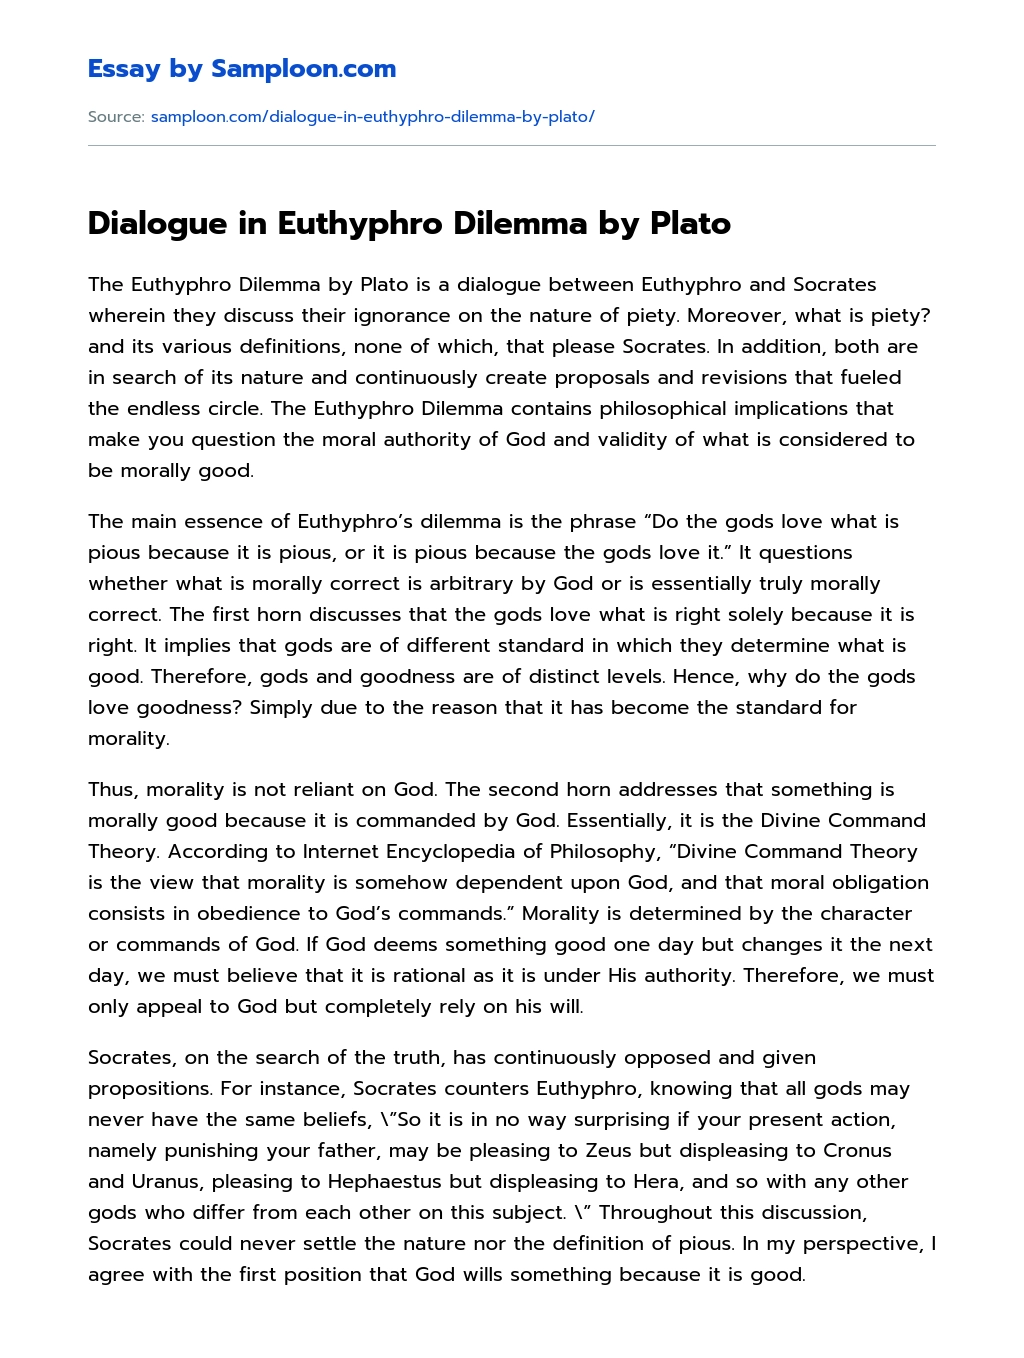 Dialogue in Euthyphro Dilemma by Plato Analytical Essay essay